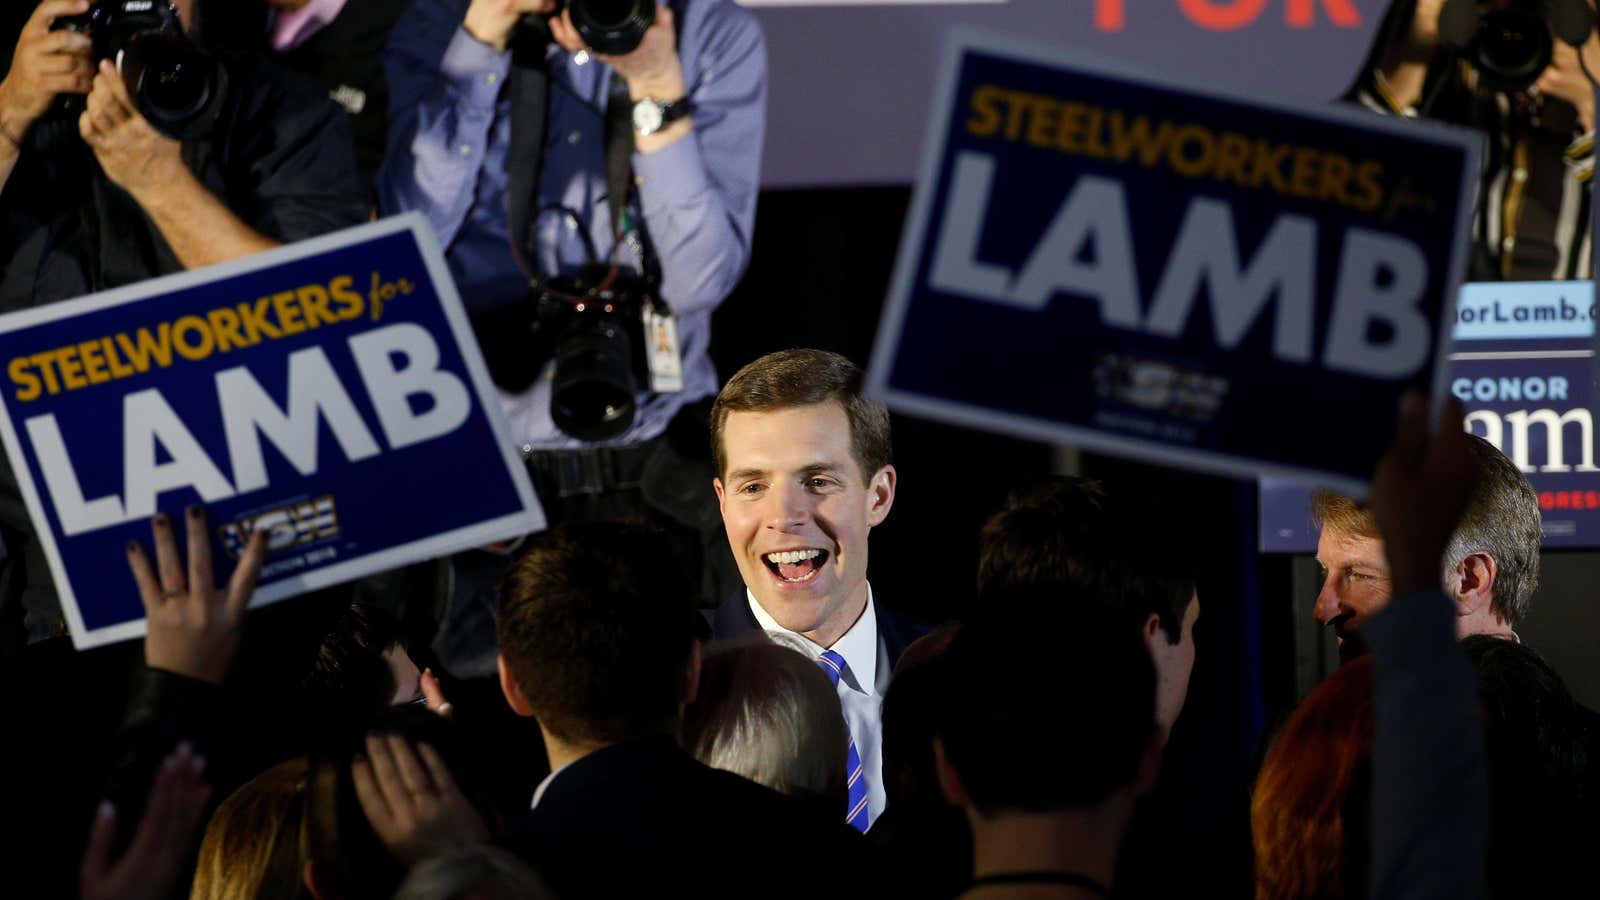 U.S. Democratic congressional candidate Conor Lamb is greeted by supporters during his election night rally in Pennsylvania’s 18th U.S. Congressional district special election against Republican…